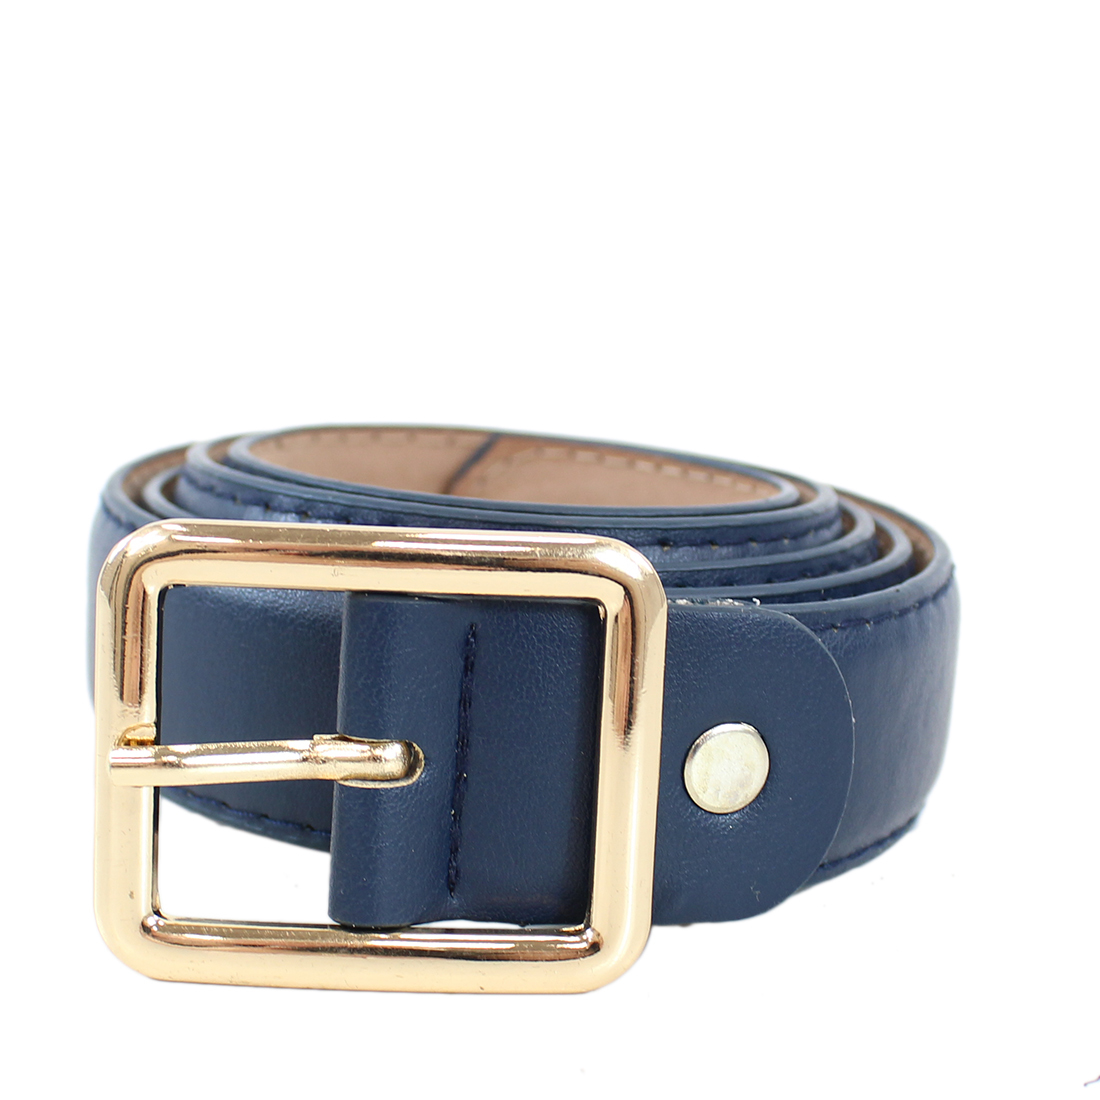 * Plain with gold buckle